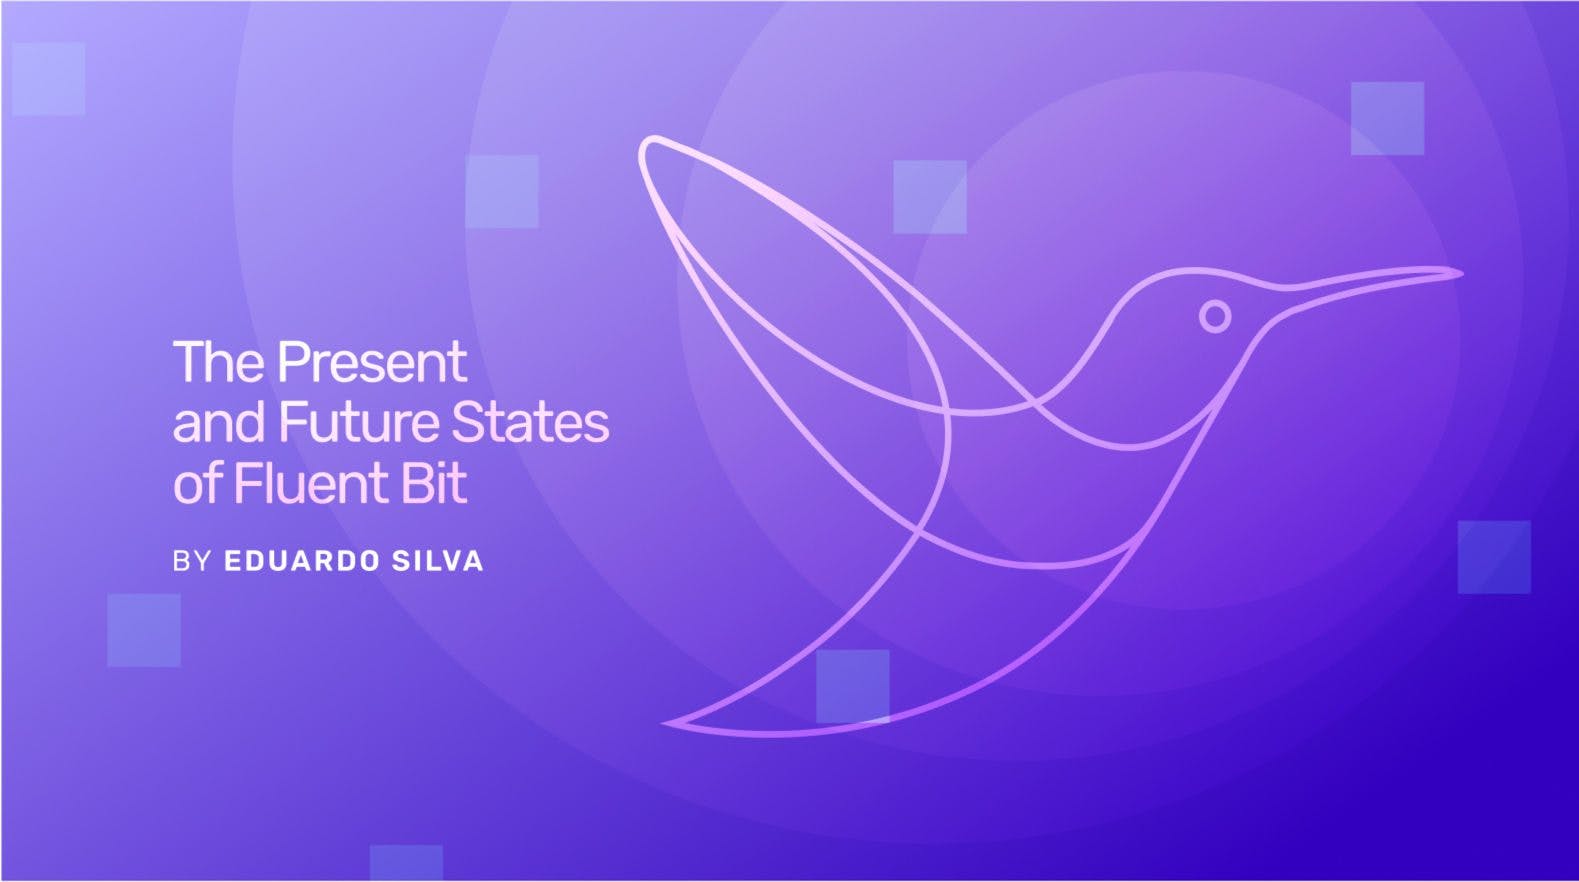 The Present and Future States of Fluent Bit